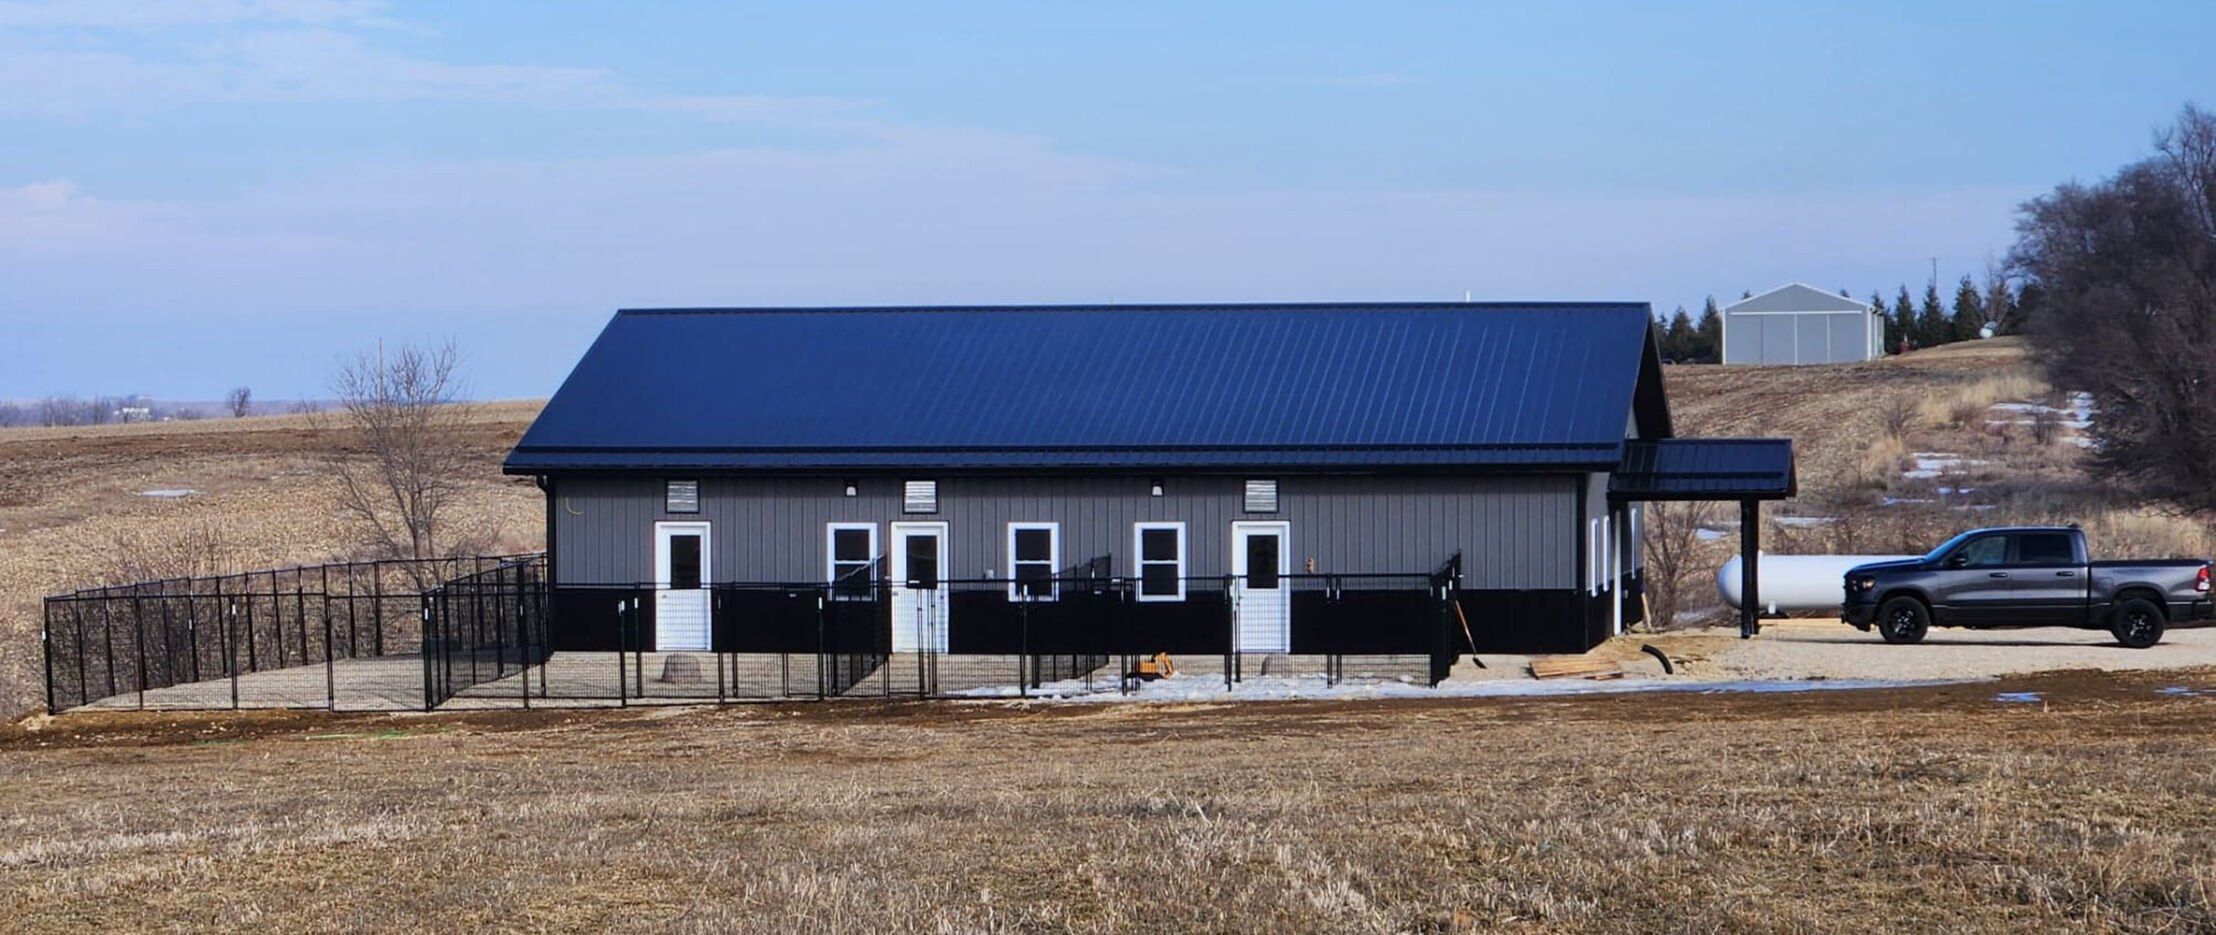 K9 Country’s Colesburg (Iowa) facility is built on owner Mindy Meyer’s family farm. Her long-held dream became a reality when the doors unofficially opened in late December.    PHOTO CREDIT: Contributed